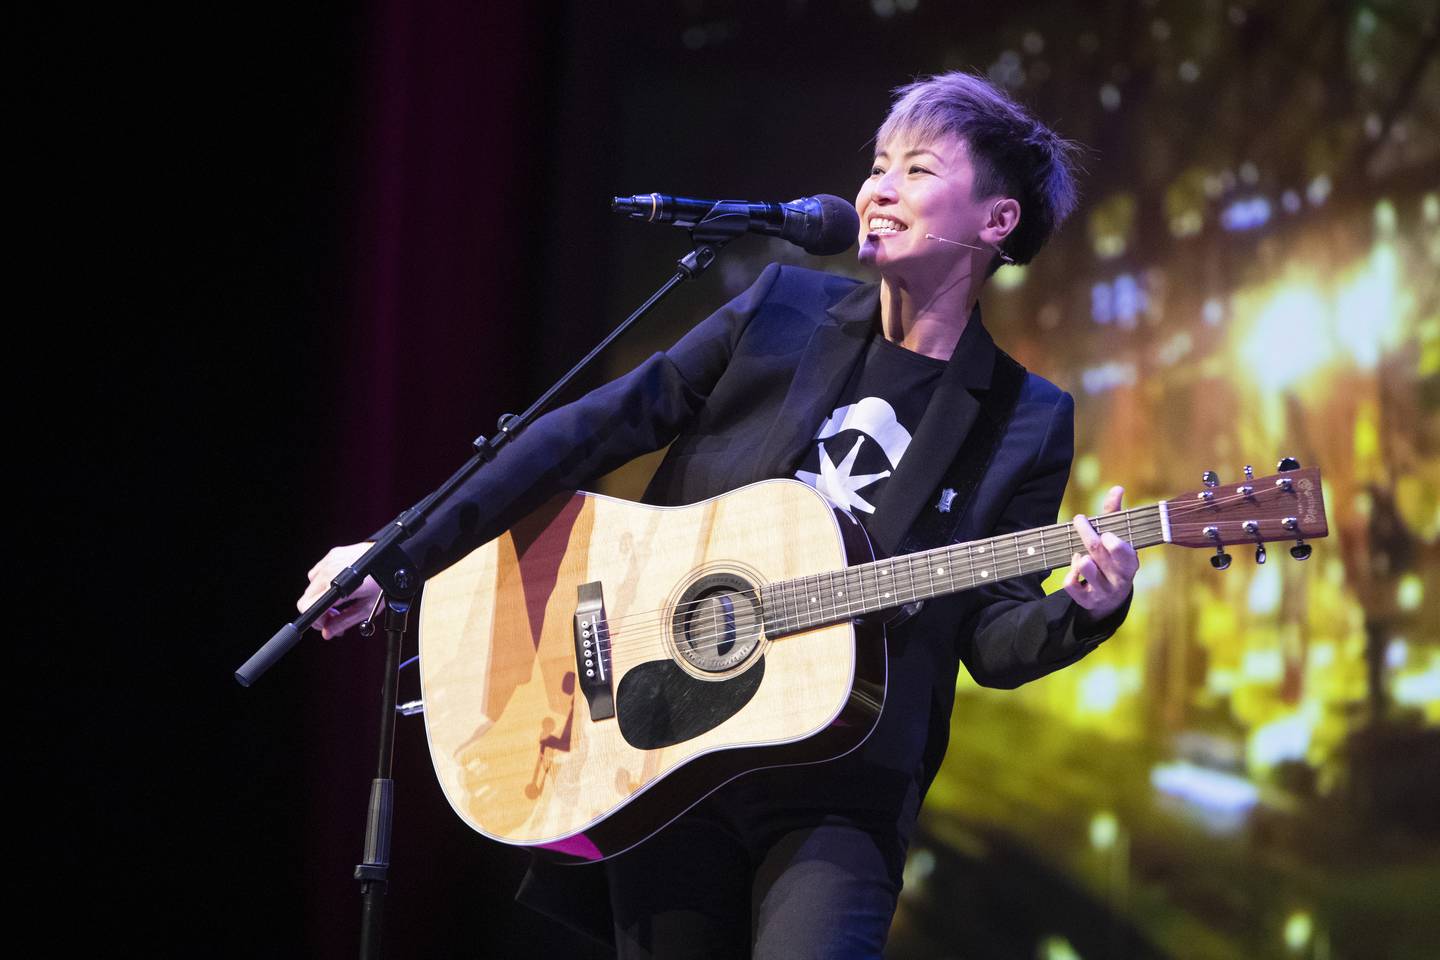 Oslo  20190527.
Hong Kong-based artist and LGBTQ rights advocate Denise Ho performs during the Oslo Freedom Forum on Monday.
Foto: Ryan Kelly / NTB